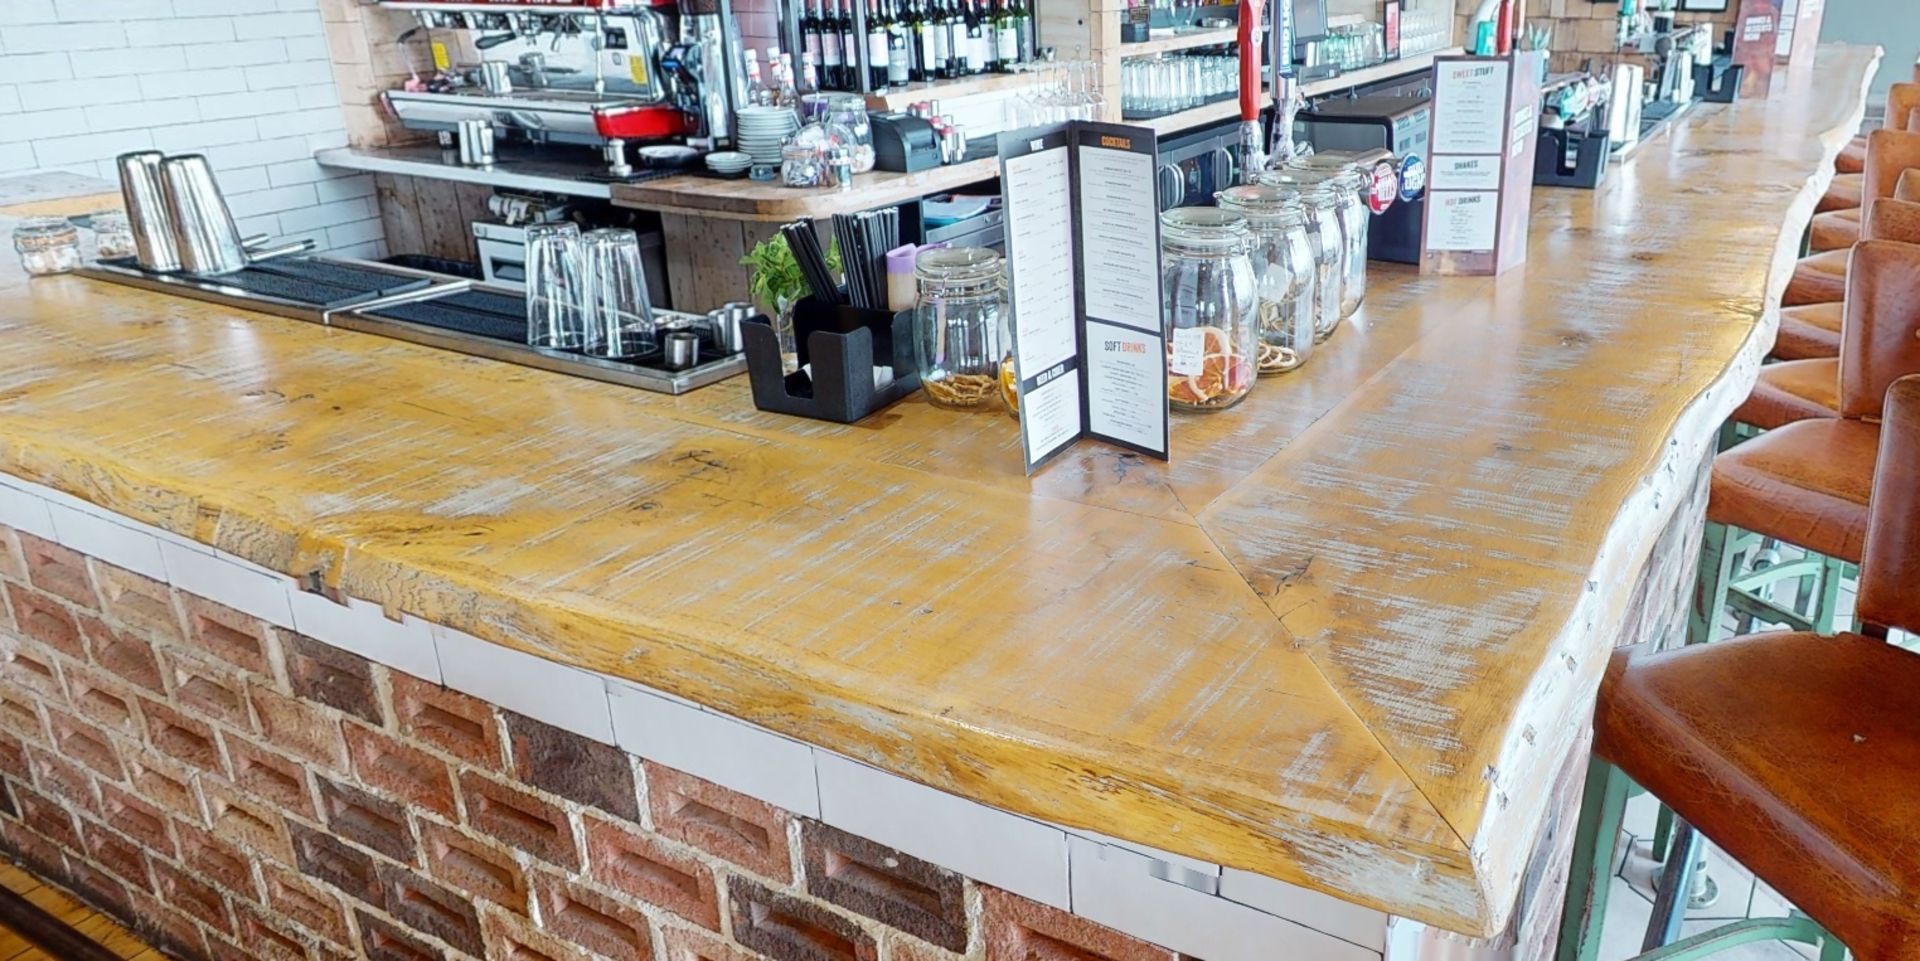 1 x Rustic Knotty Oak L Shaped Bar Top With an Earthy Finish and Live Edge - Approx 22ft in Legth! - Image 2 of 16